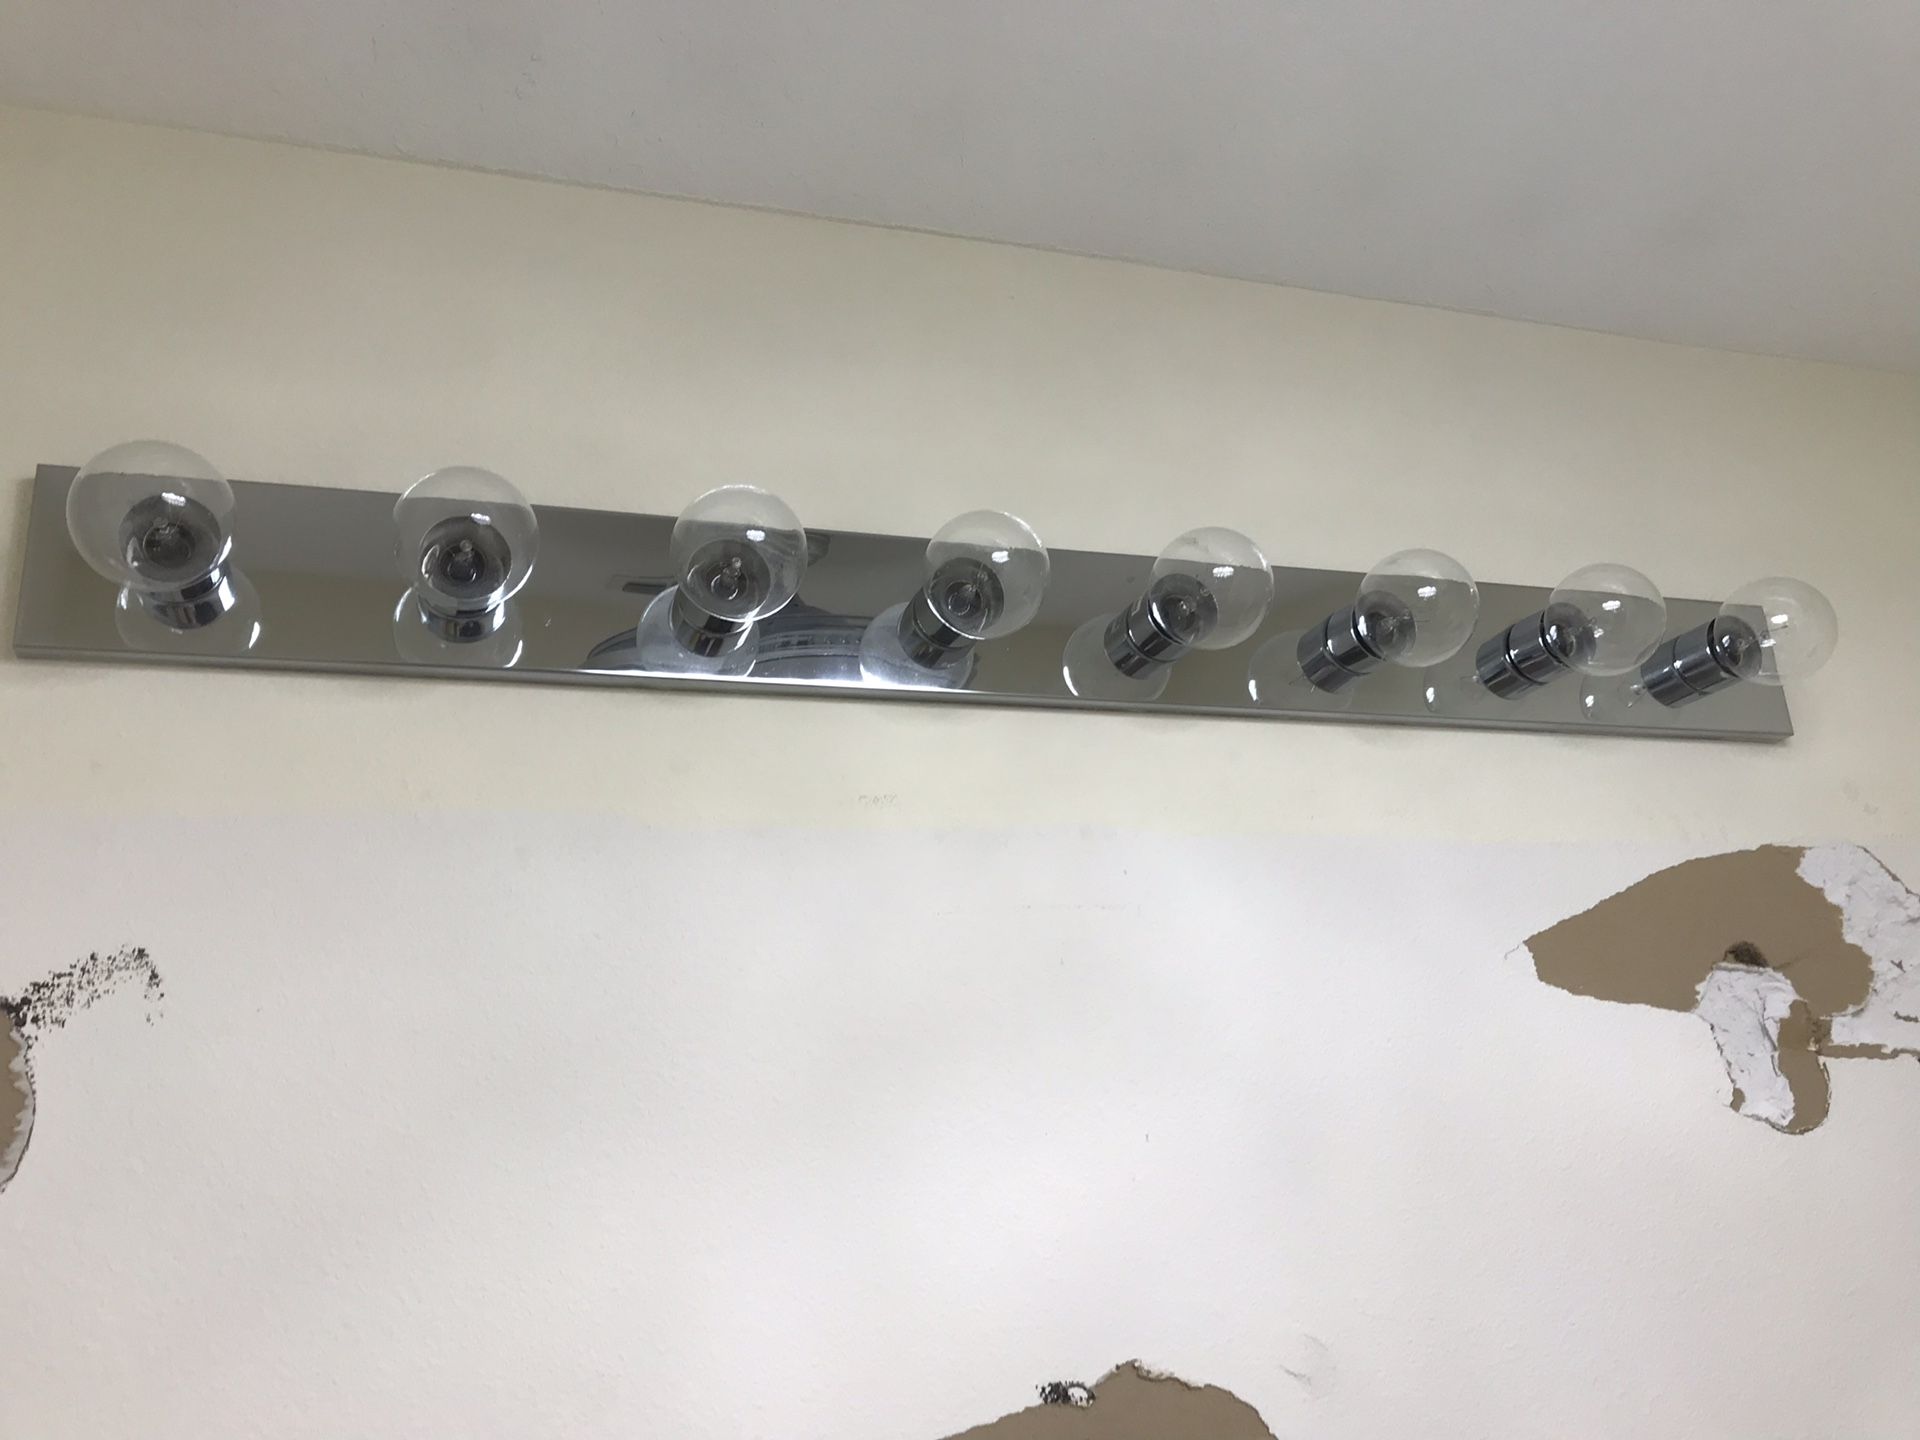 This is an 8-light fixture and other fixture is a 4-light fixture - complete with 12 clear globe bulbs.